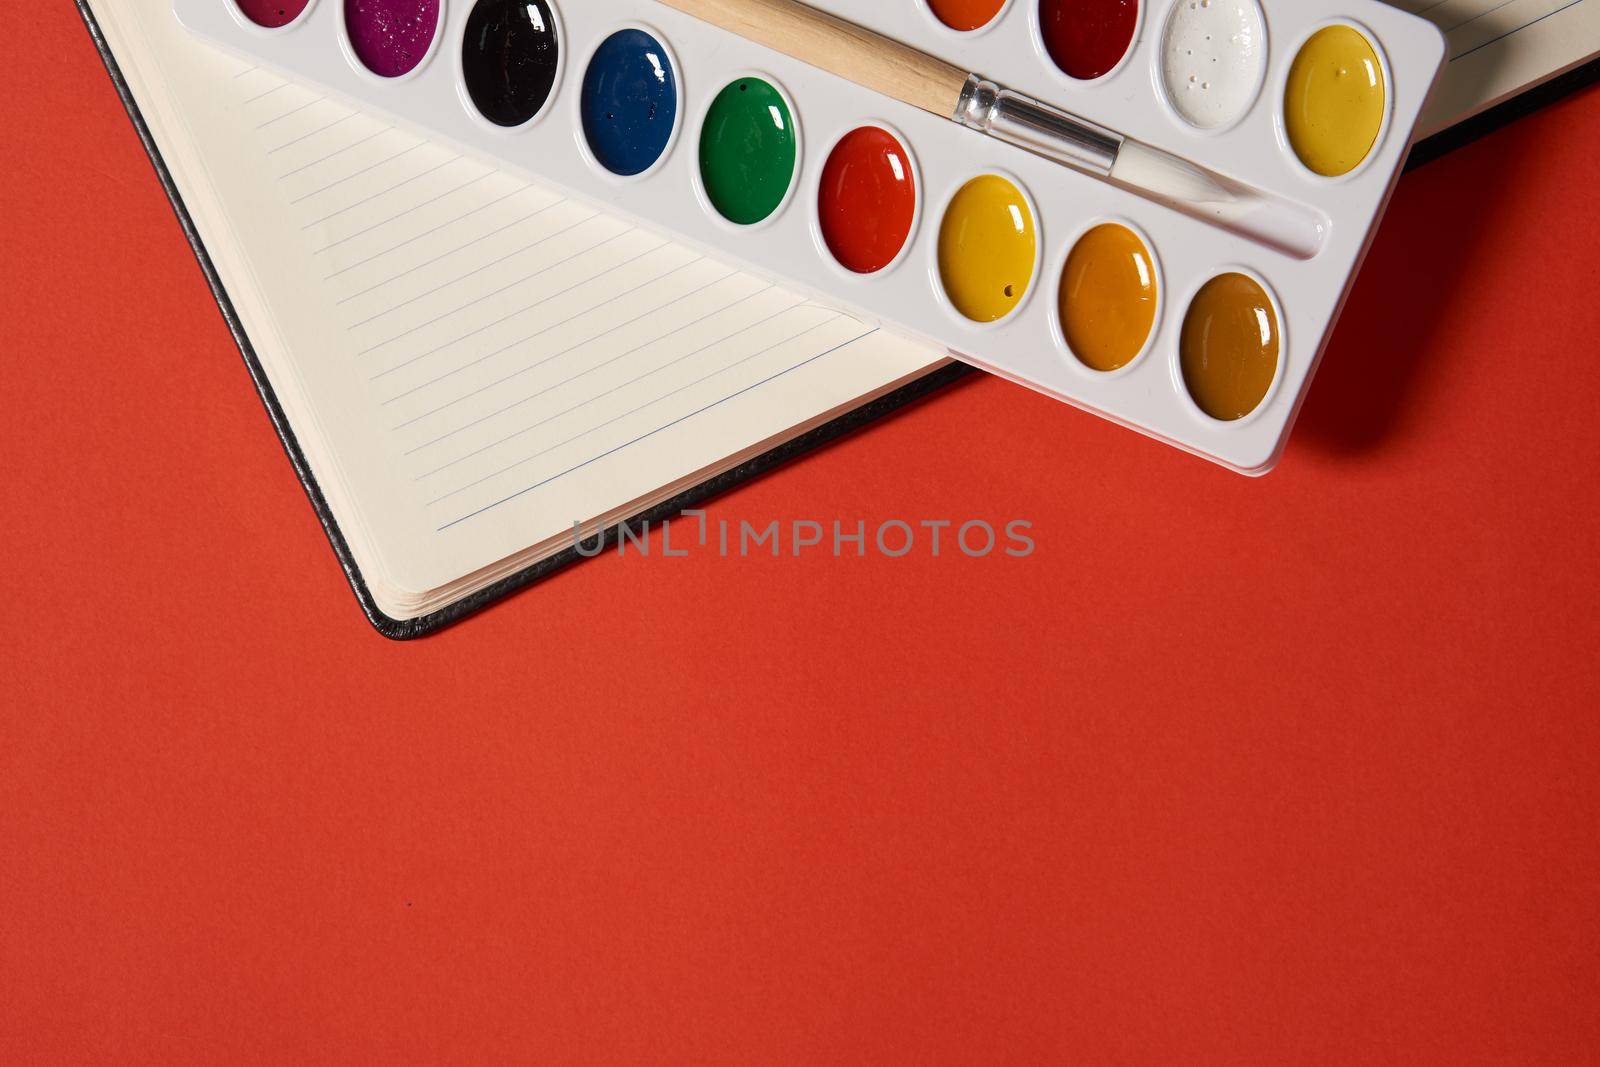 paints for painting artist learning hobby wooden mockup. High quality photo